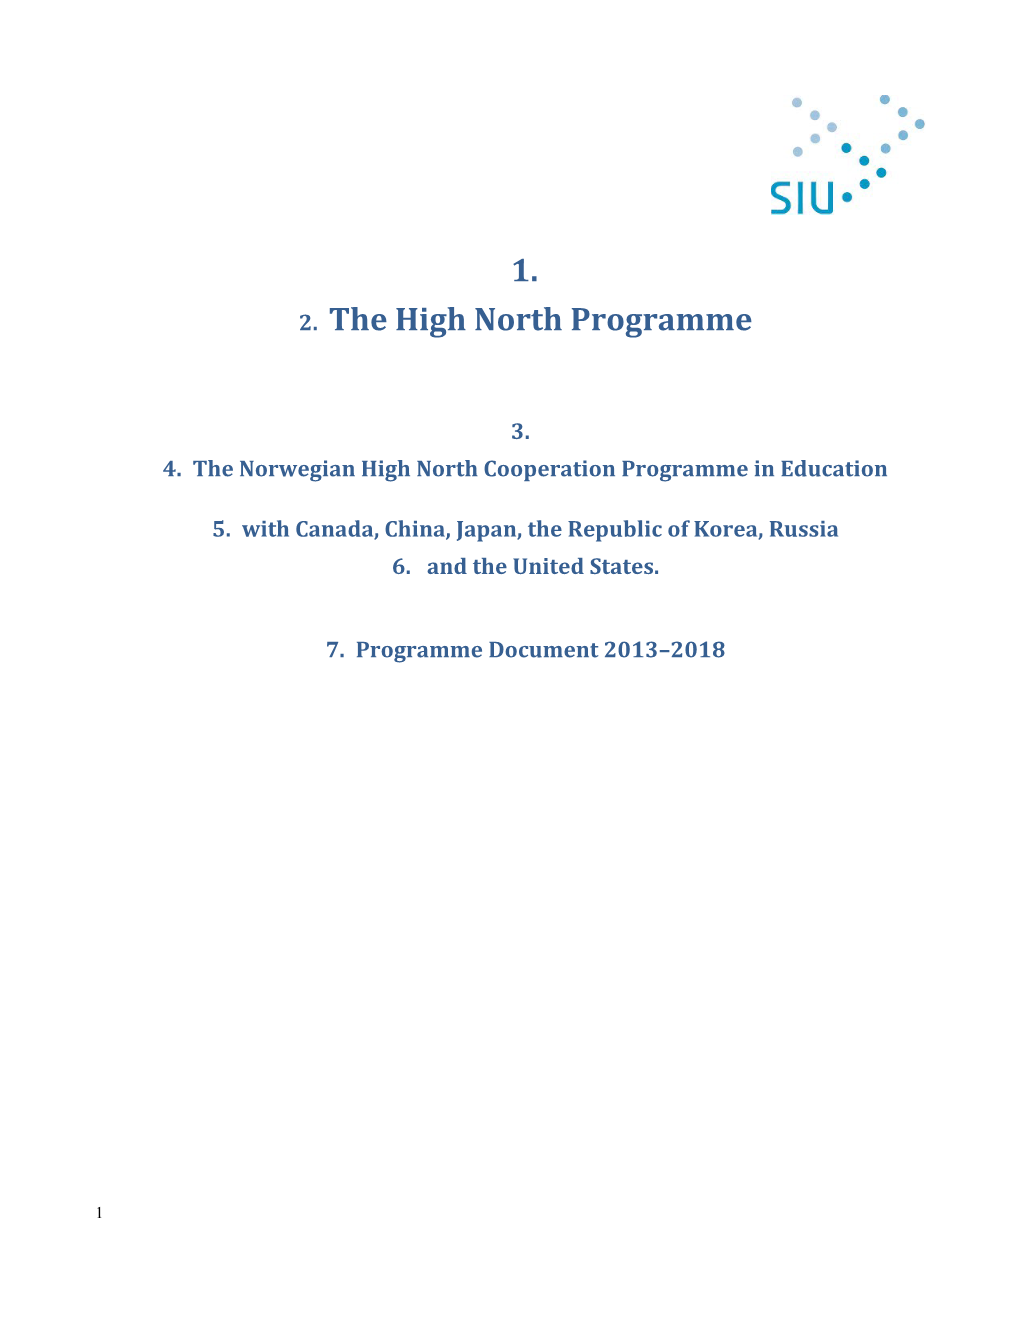 The High North Programme